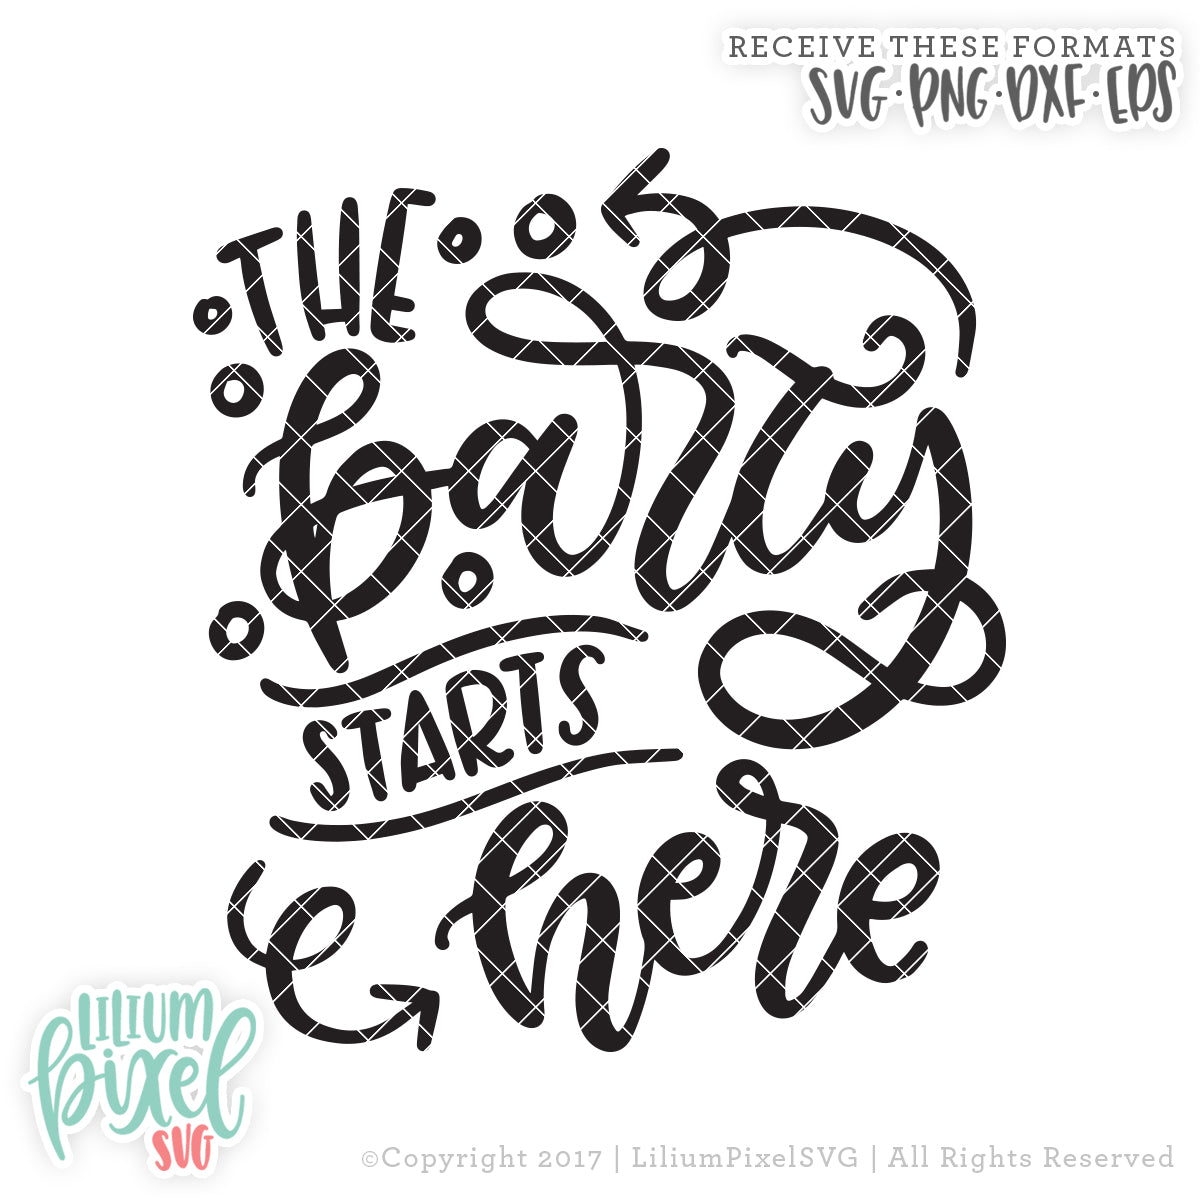 The Party Starts Here - SVG PNG DXF EPS Cut File • Silhouette • Cricut • More